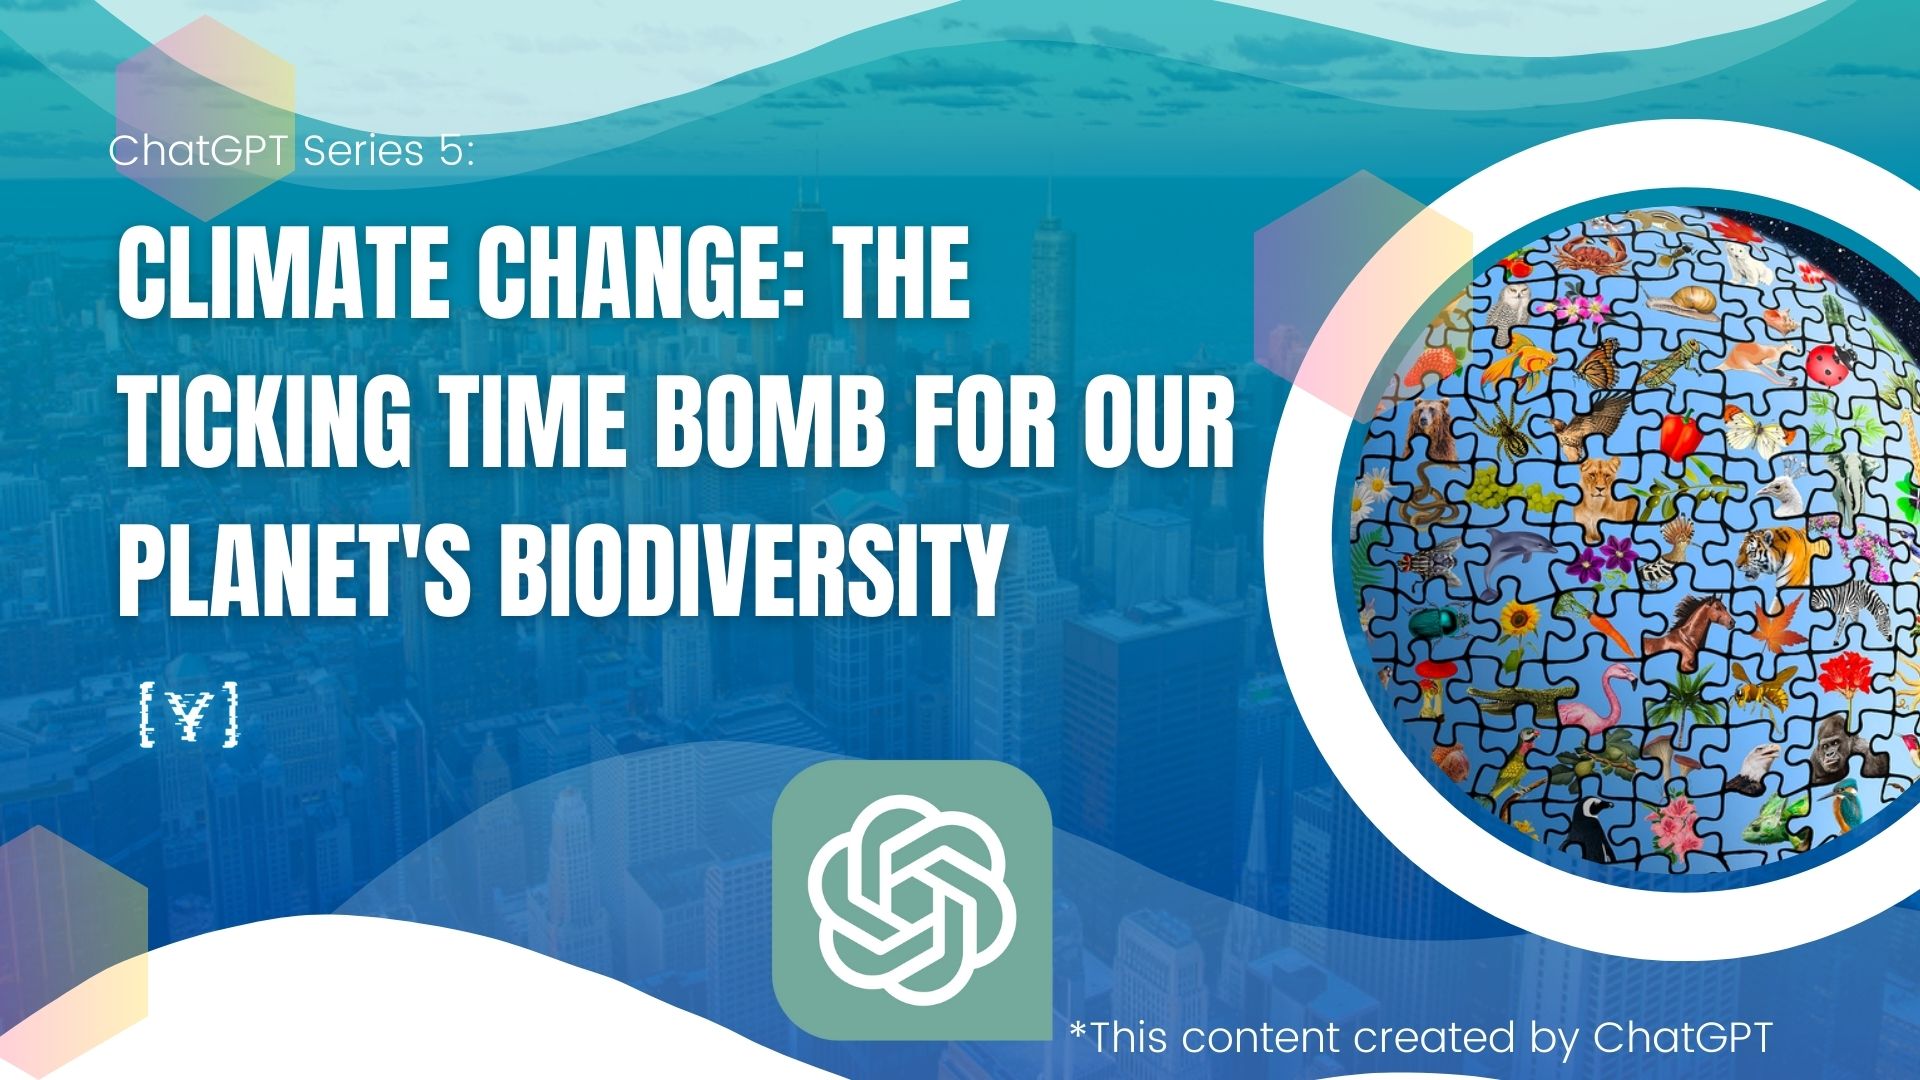 Climate Change: The ticking time bomb for our planet's biodiversity